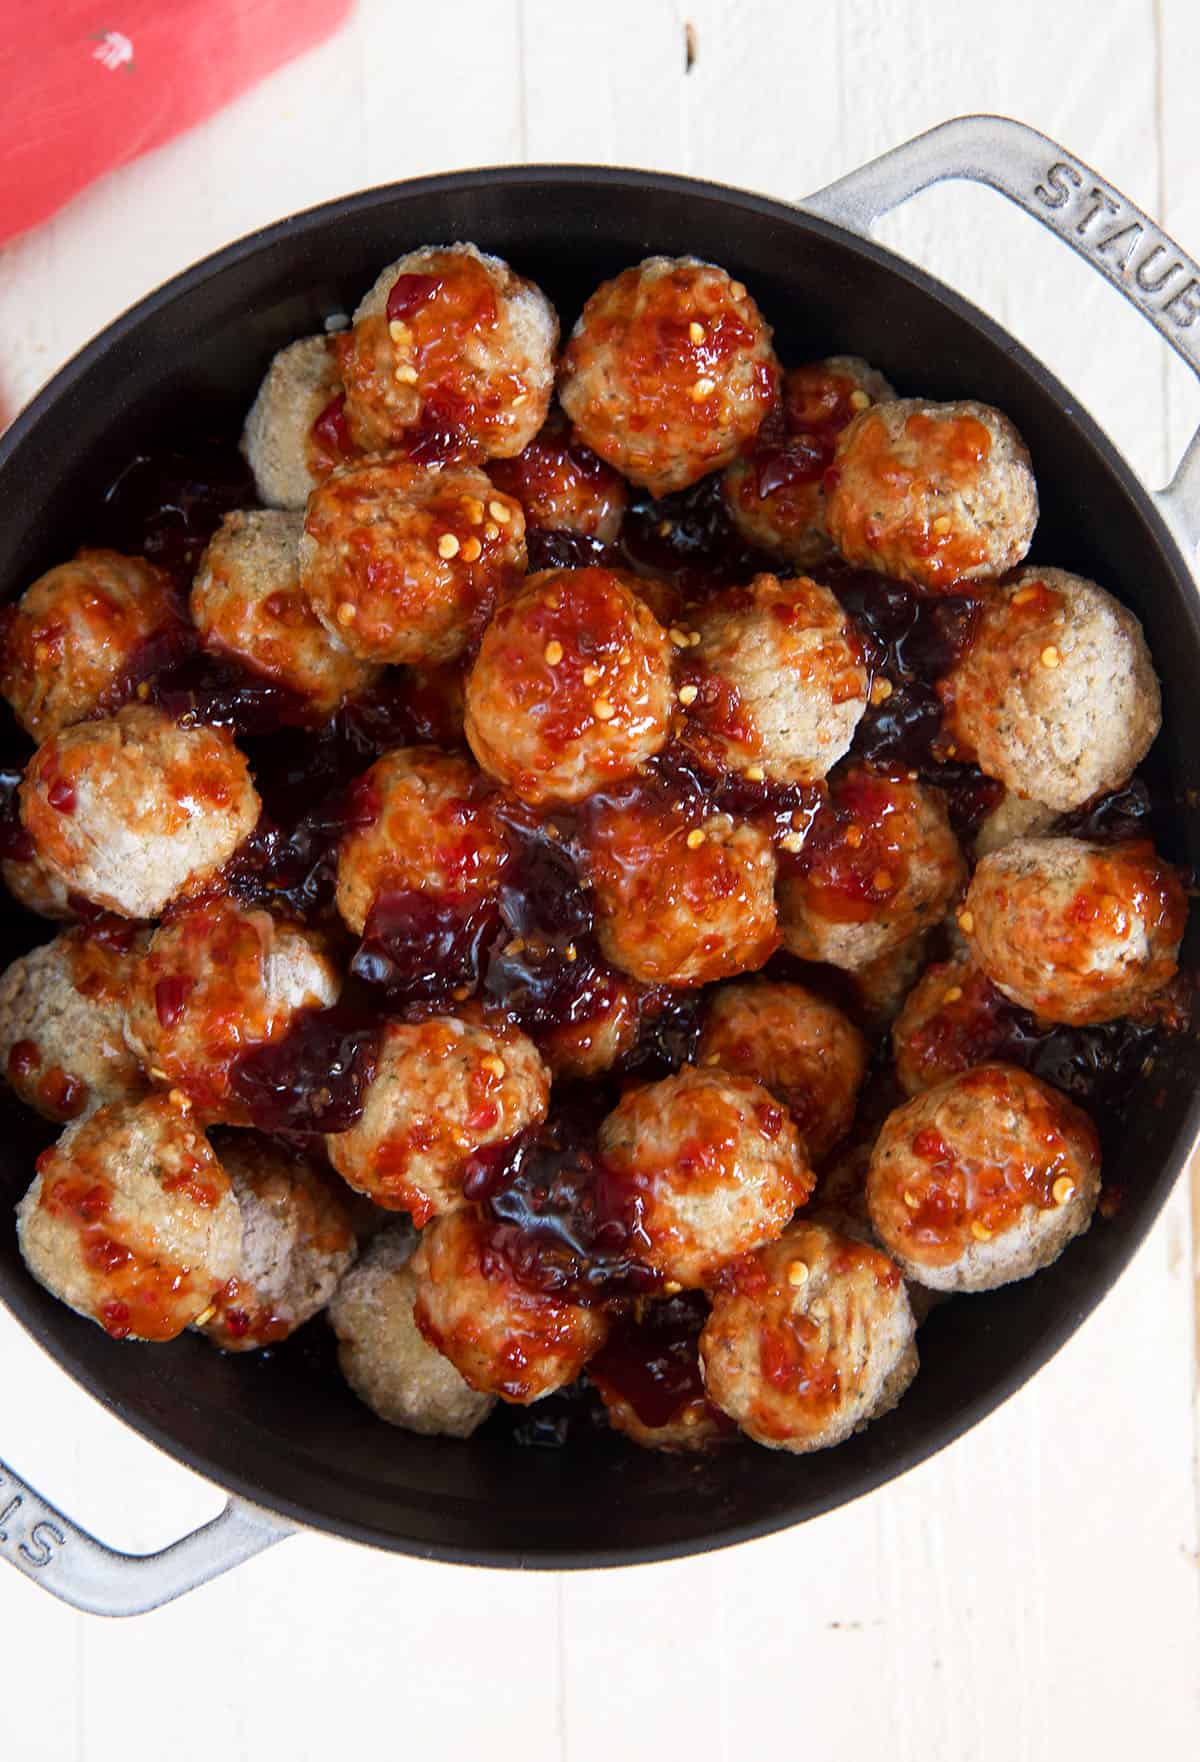 Frozen meatballs in a pot are mixed with jelly and chili garlic sauce.